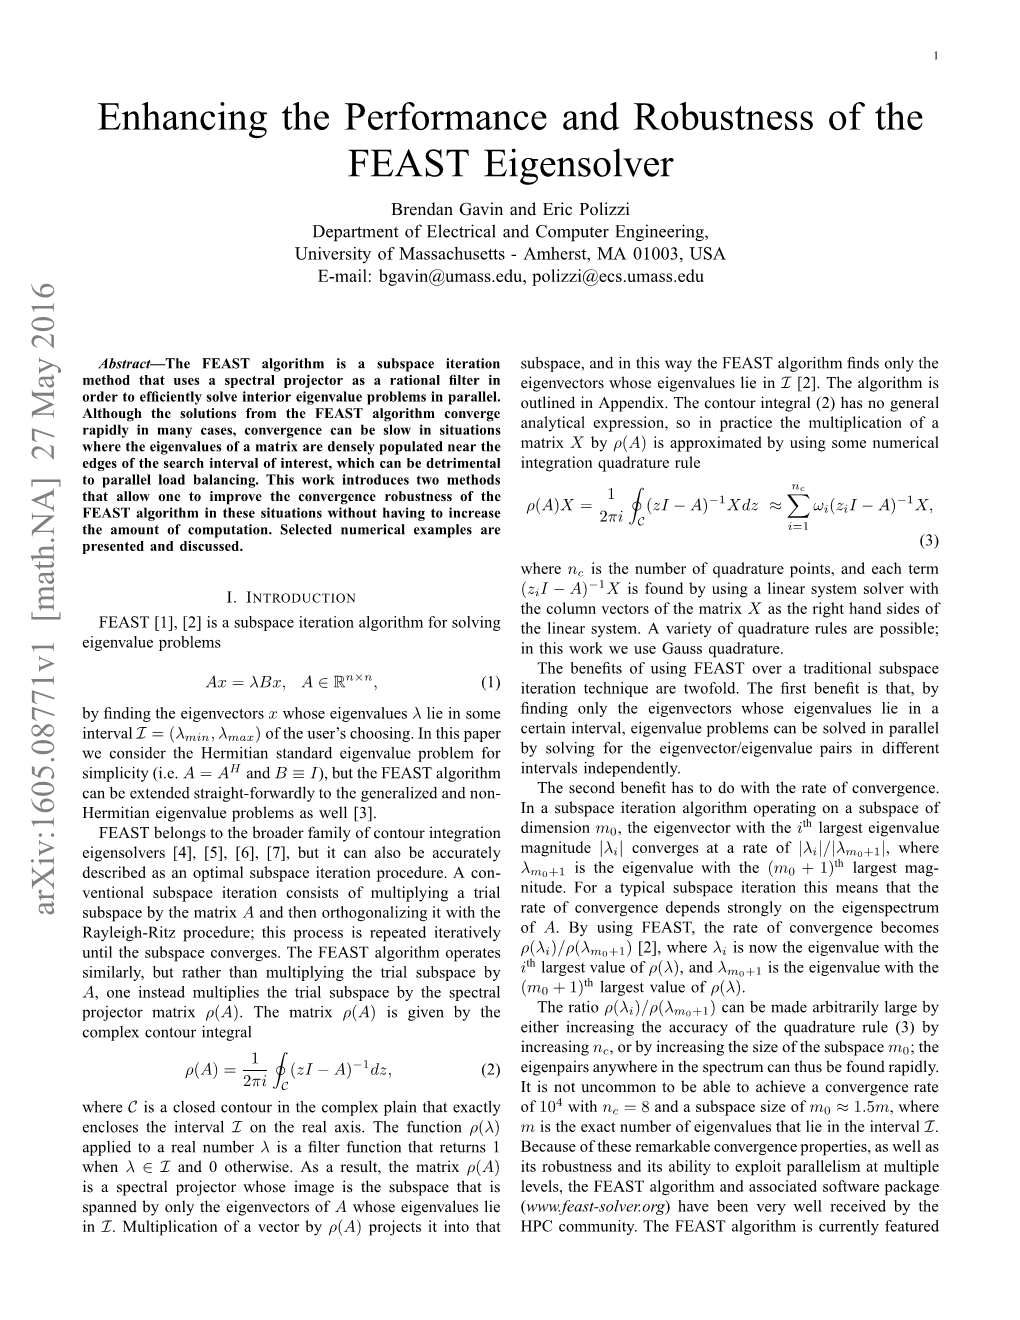 Enhancing the Performance and Robustness of the FEAST Eigensolver